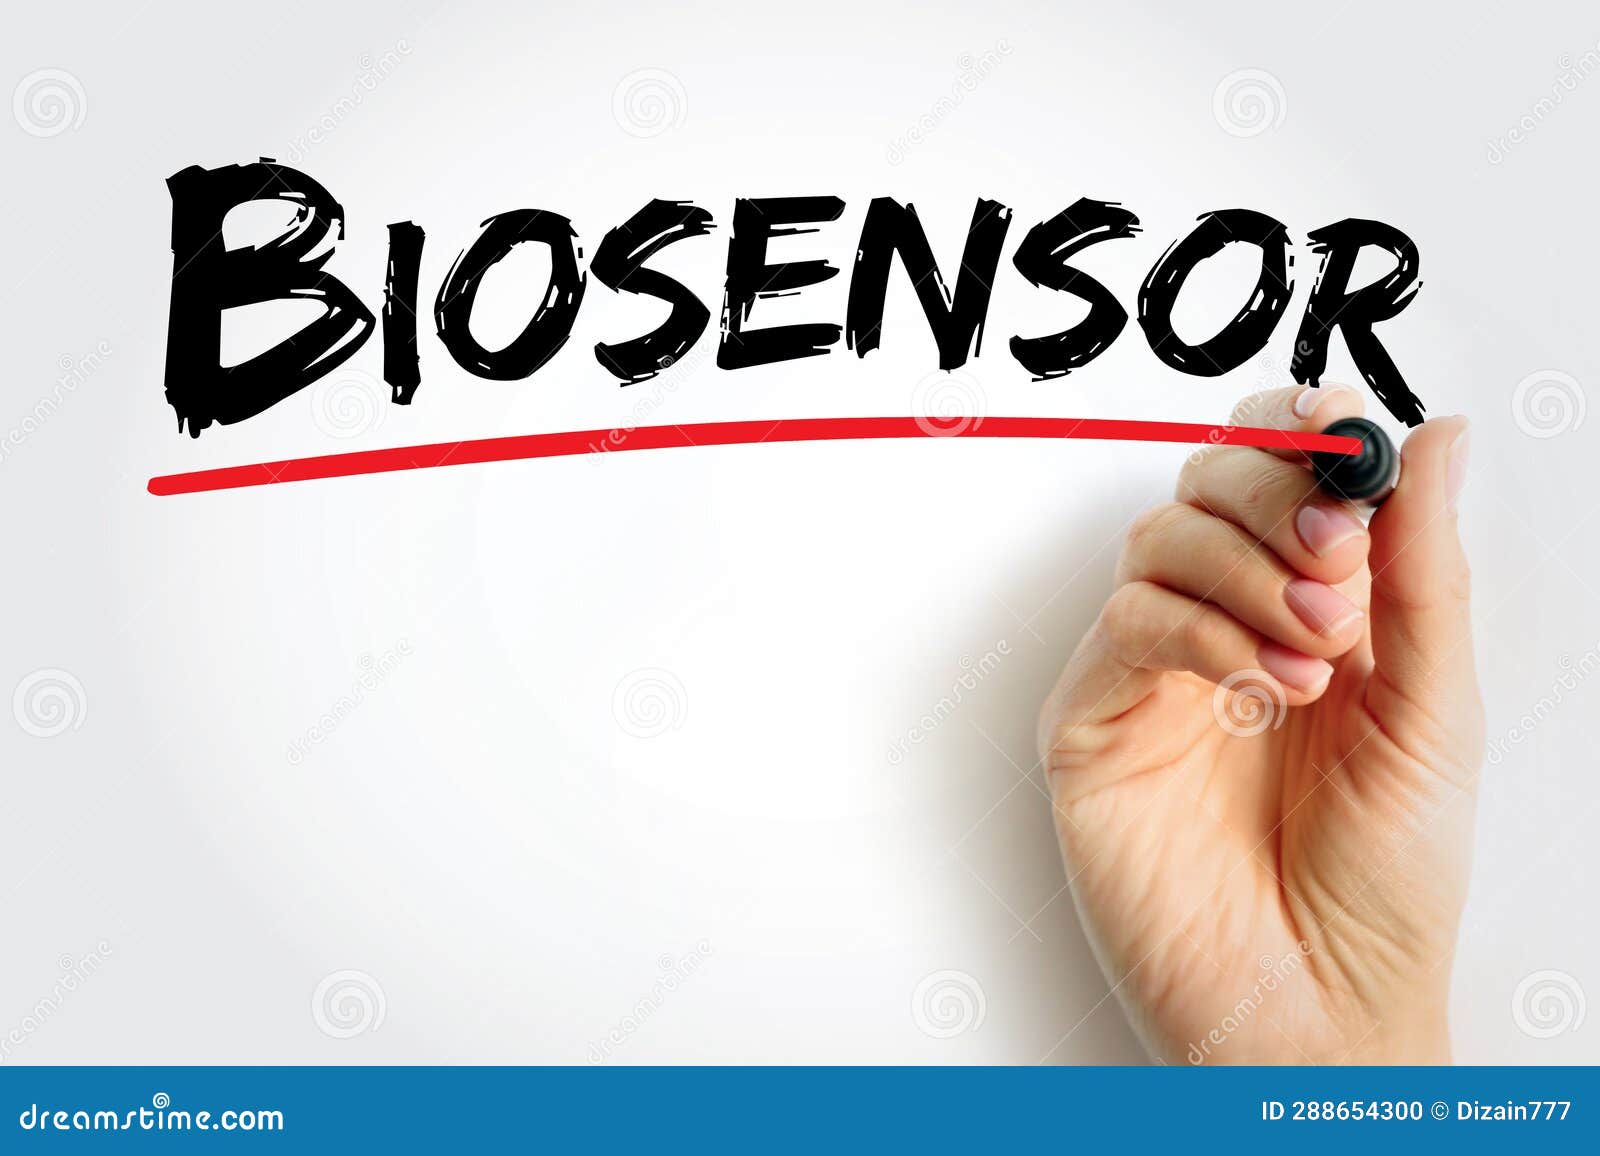 biosensor is an analytical device, used for the detection of a chemical substance, text concept background